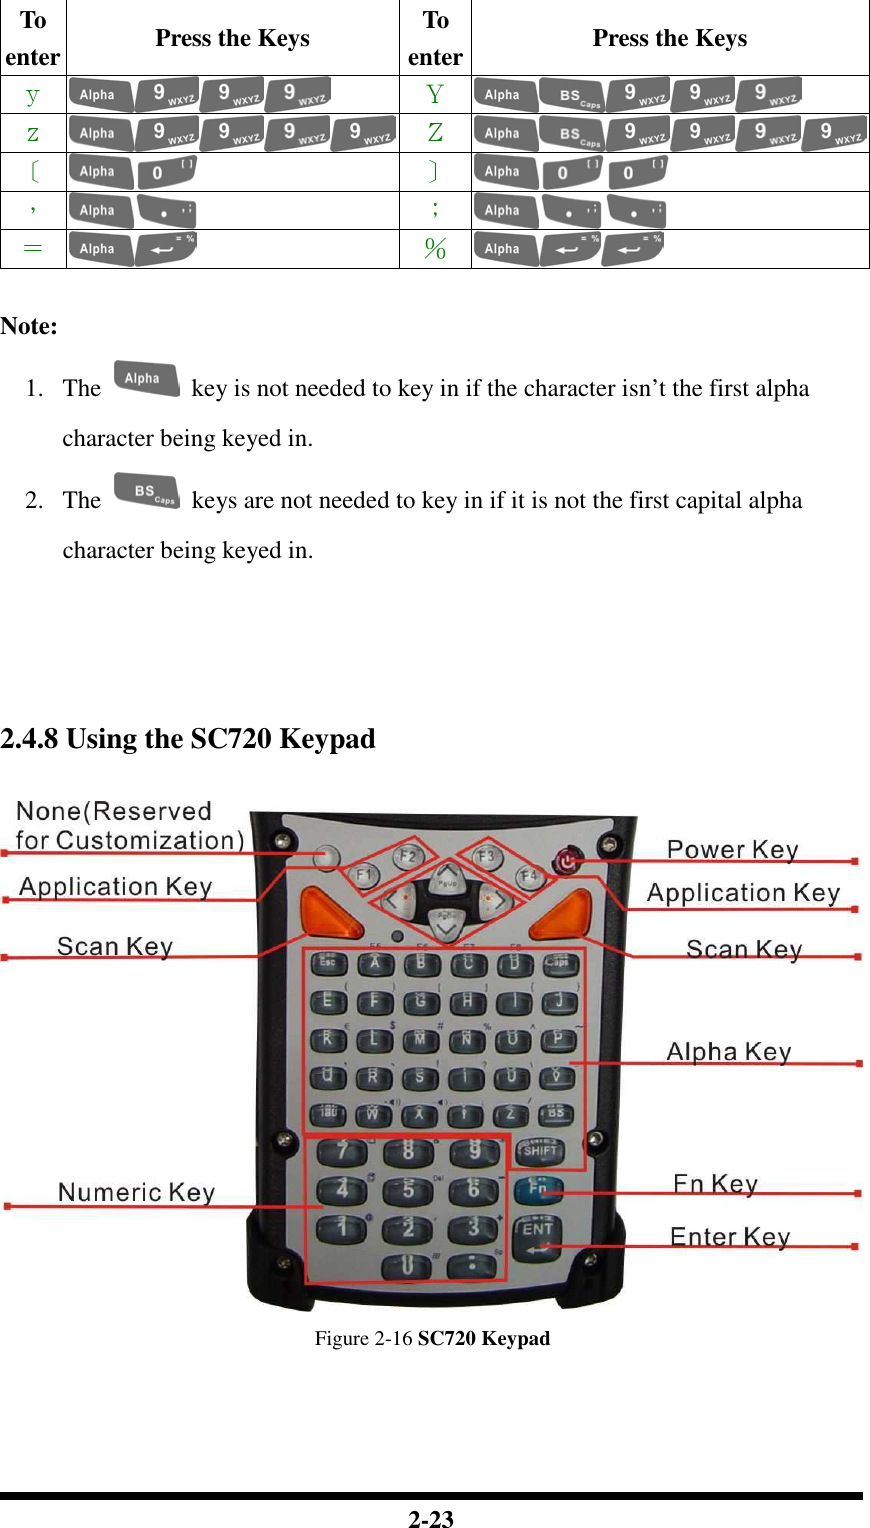  2-23 To enter Press the Keys  To enter Press the Keys ｙ  Ｙ  ｚ  Ｚ  〔  〕  ，  ；  ＝  ％   Note: 1. The    key is not needed to key in if the character isn’t the first alpha character being keyed in. 2. The    keys are not needed to key in if it is not the first capital alpha character being keyed in.     2.4.8 Using the SC720 Keypad   Figure 2-16 SC720 Keypad   